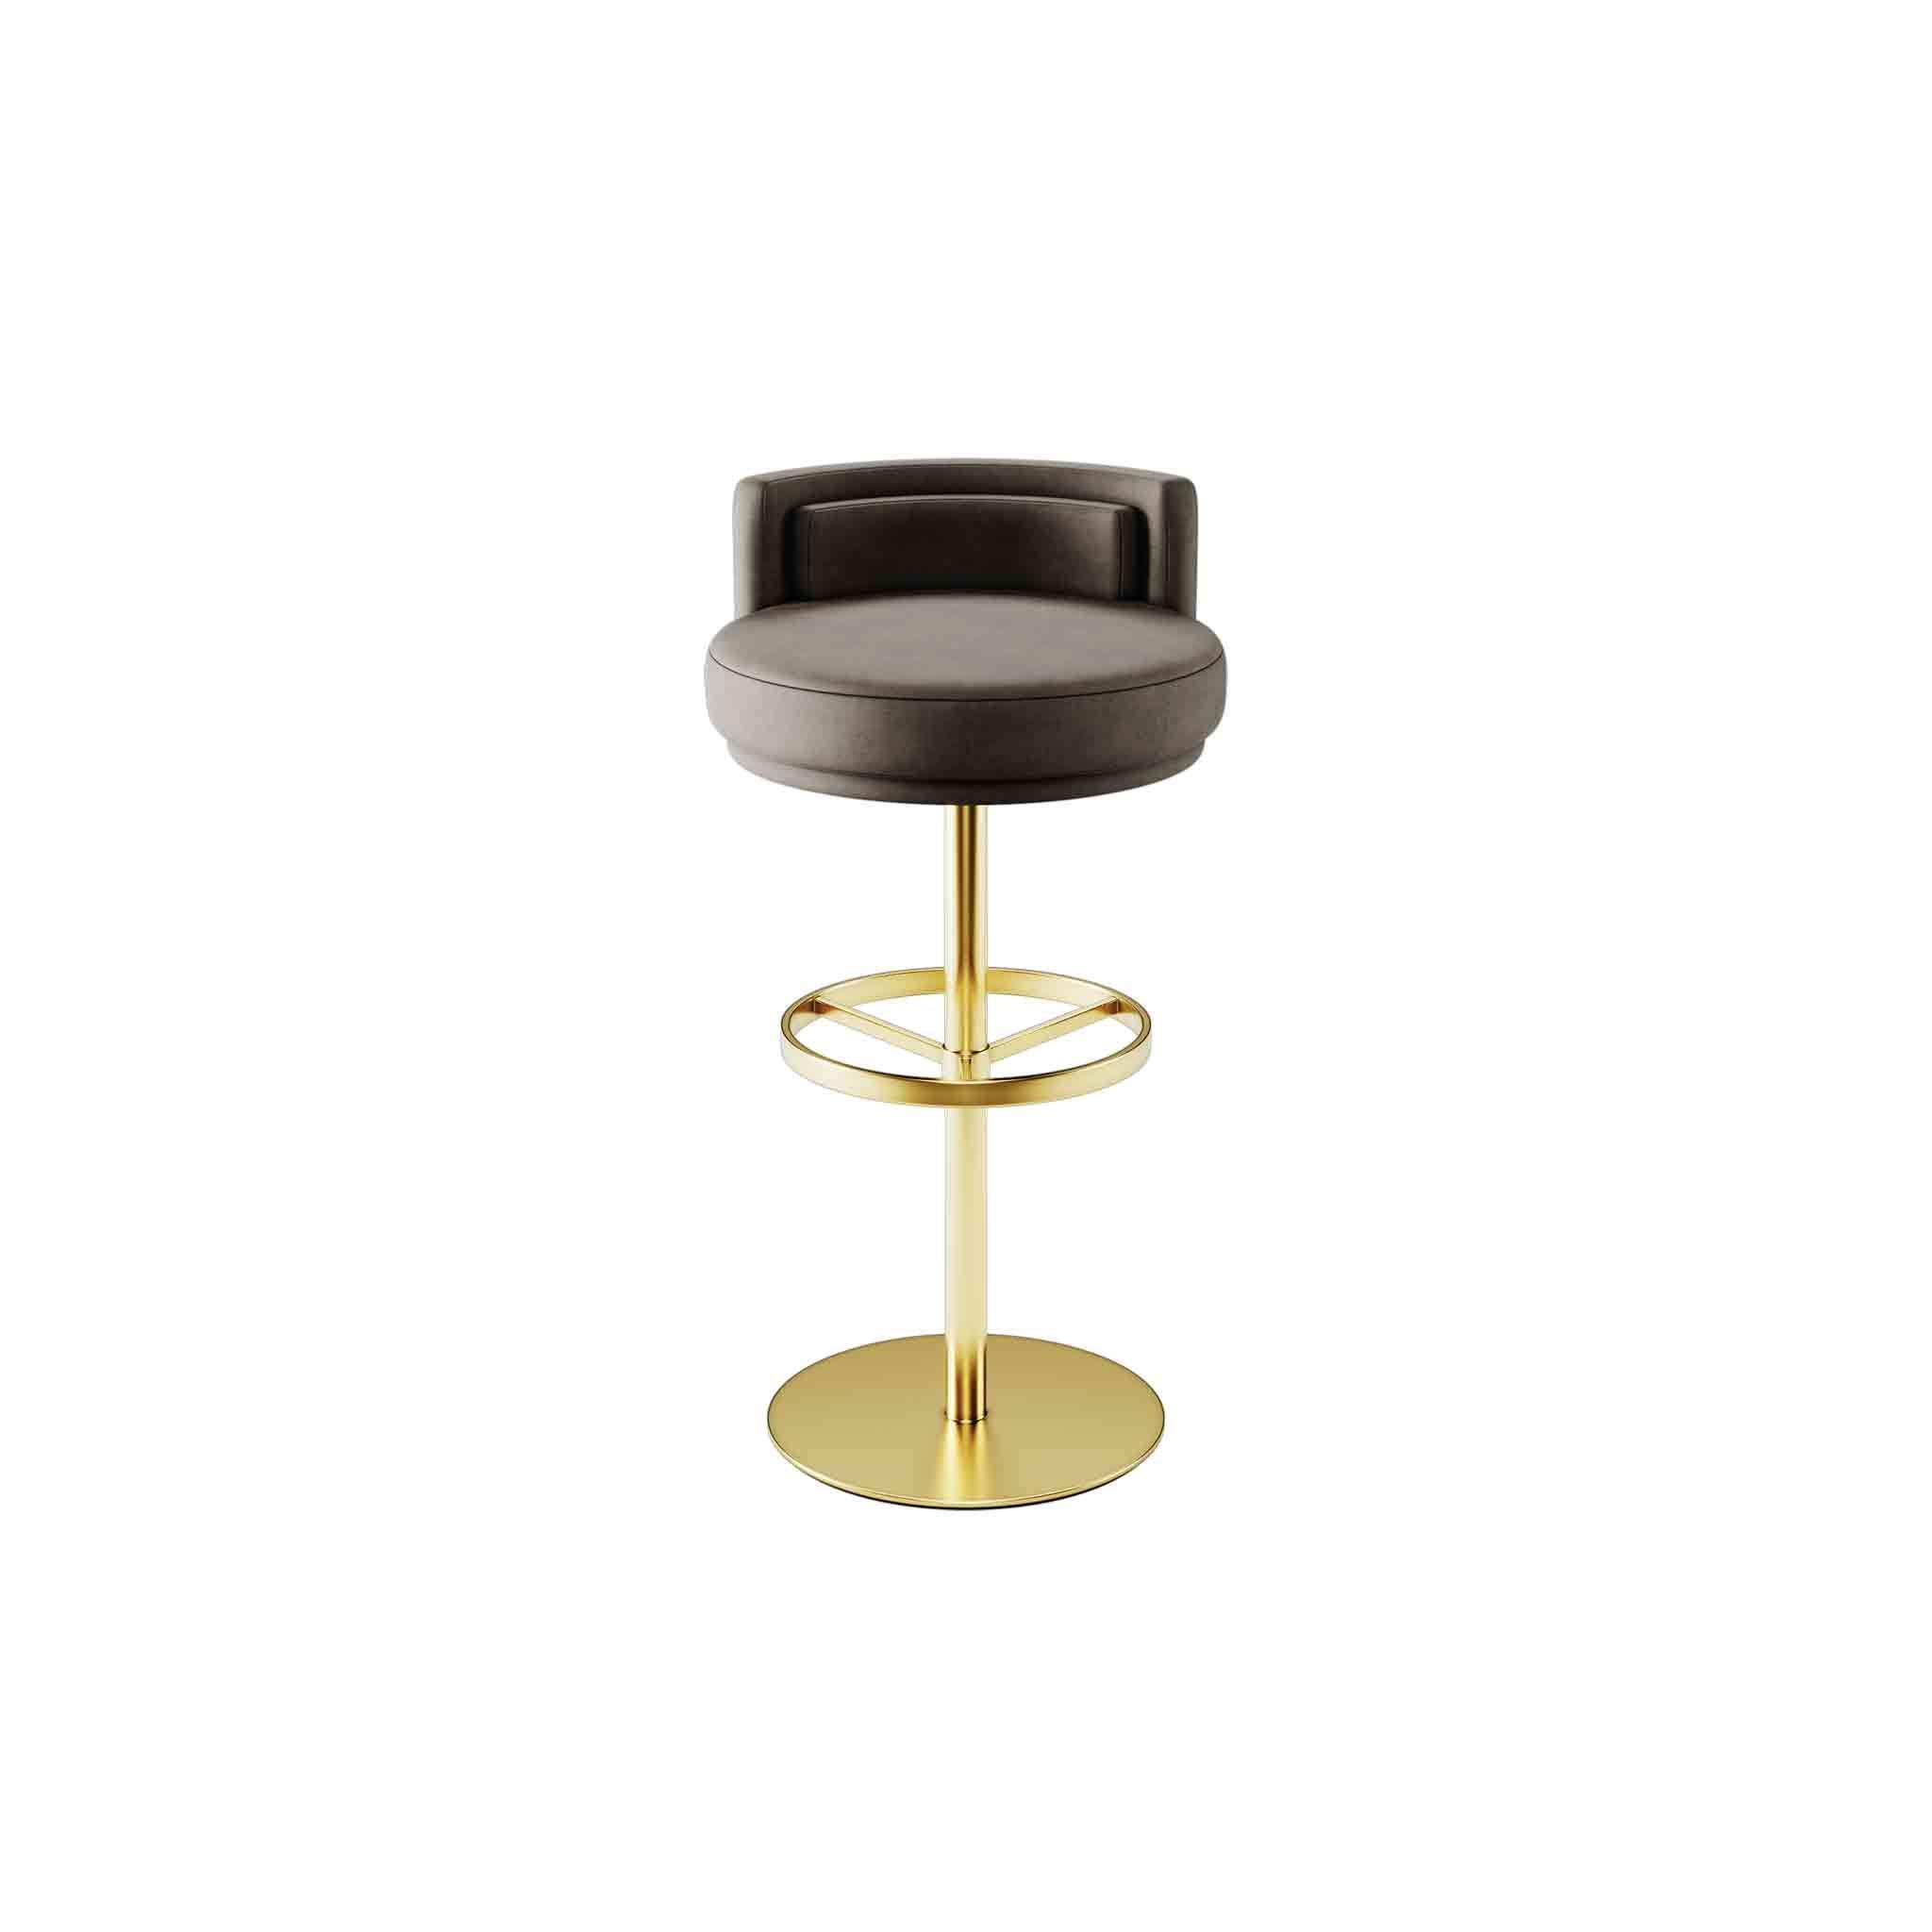 Cluedo Counter Stool is a Memphis design style chair. A swivel counter stool that brings comfort and modernity into a luxury hospitality project. This modern chair enlivens a contemporary interior design project. 

Materials: Upholstered in Velvet;